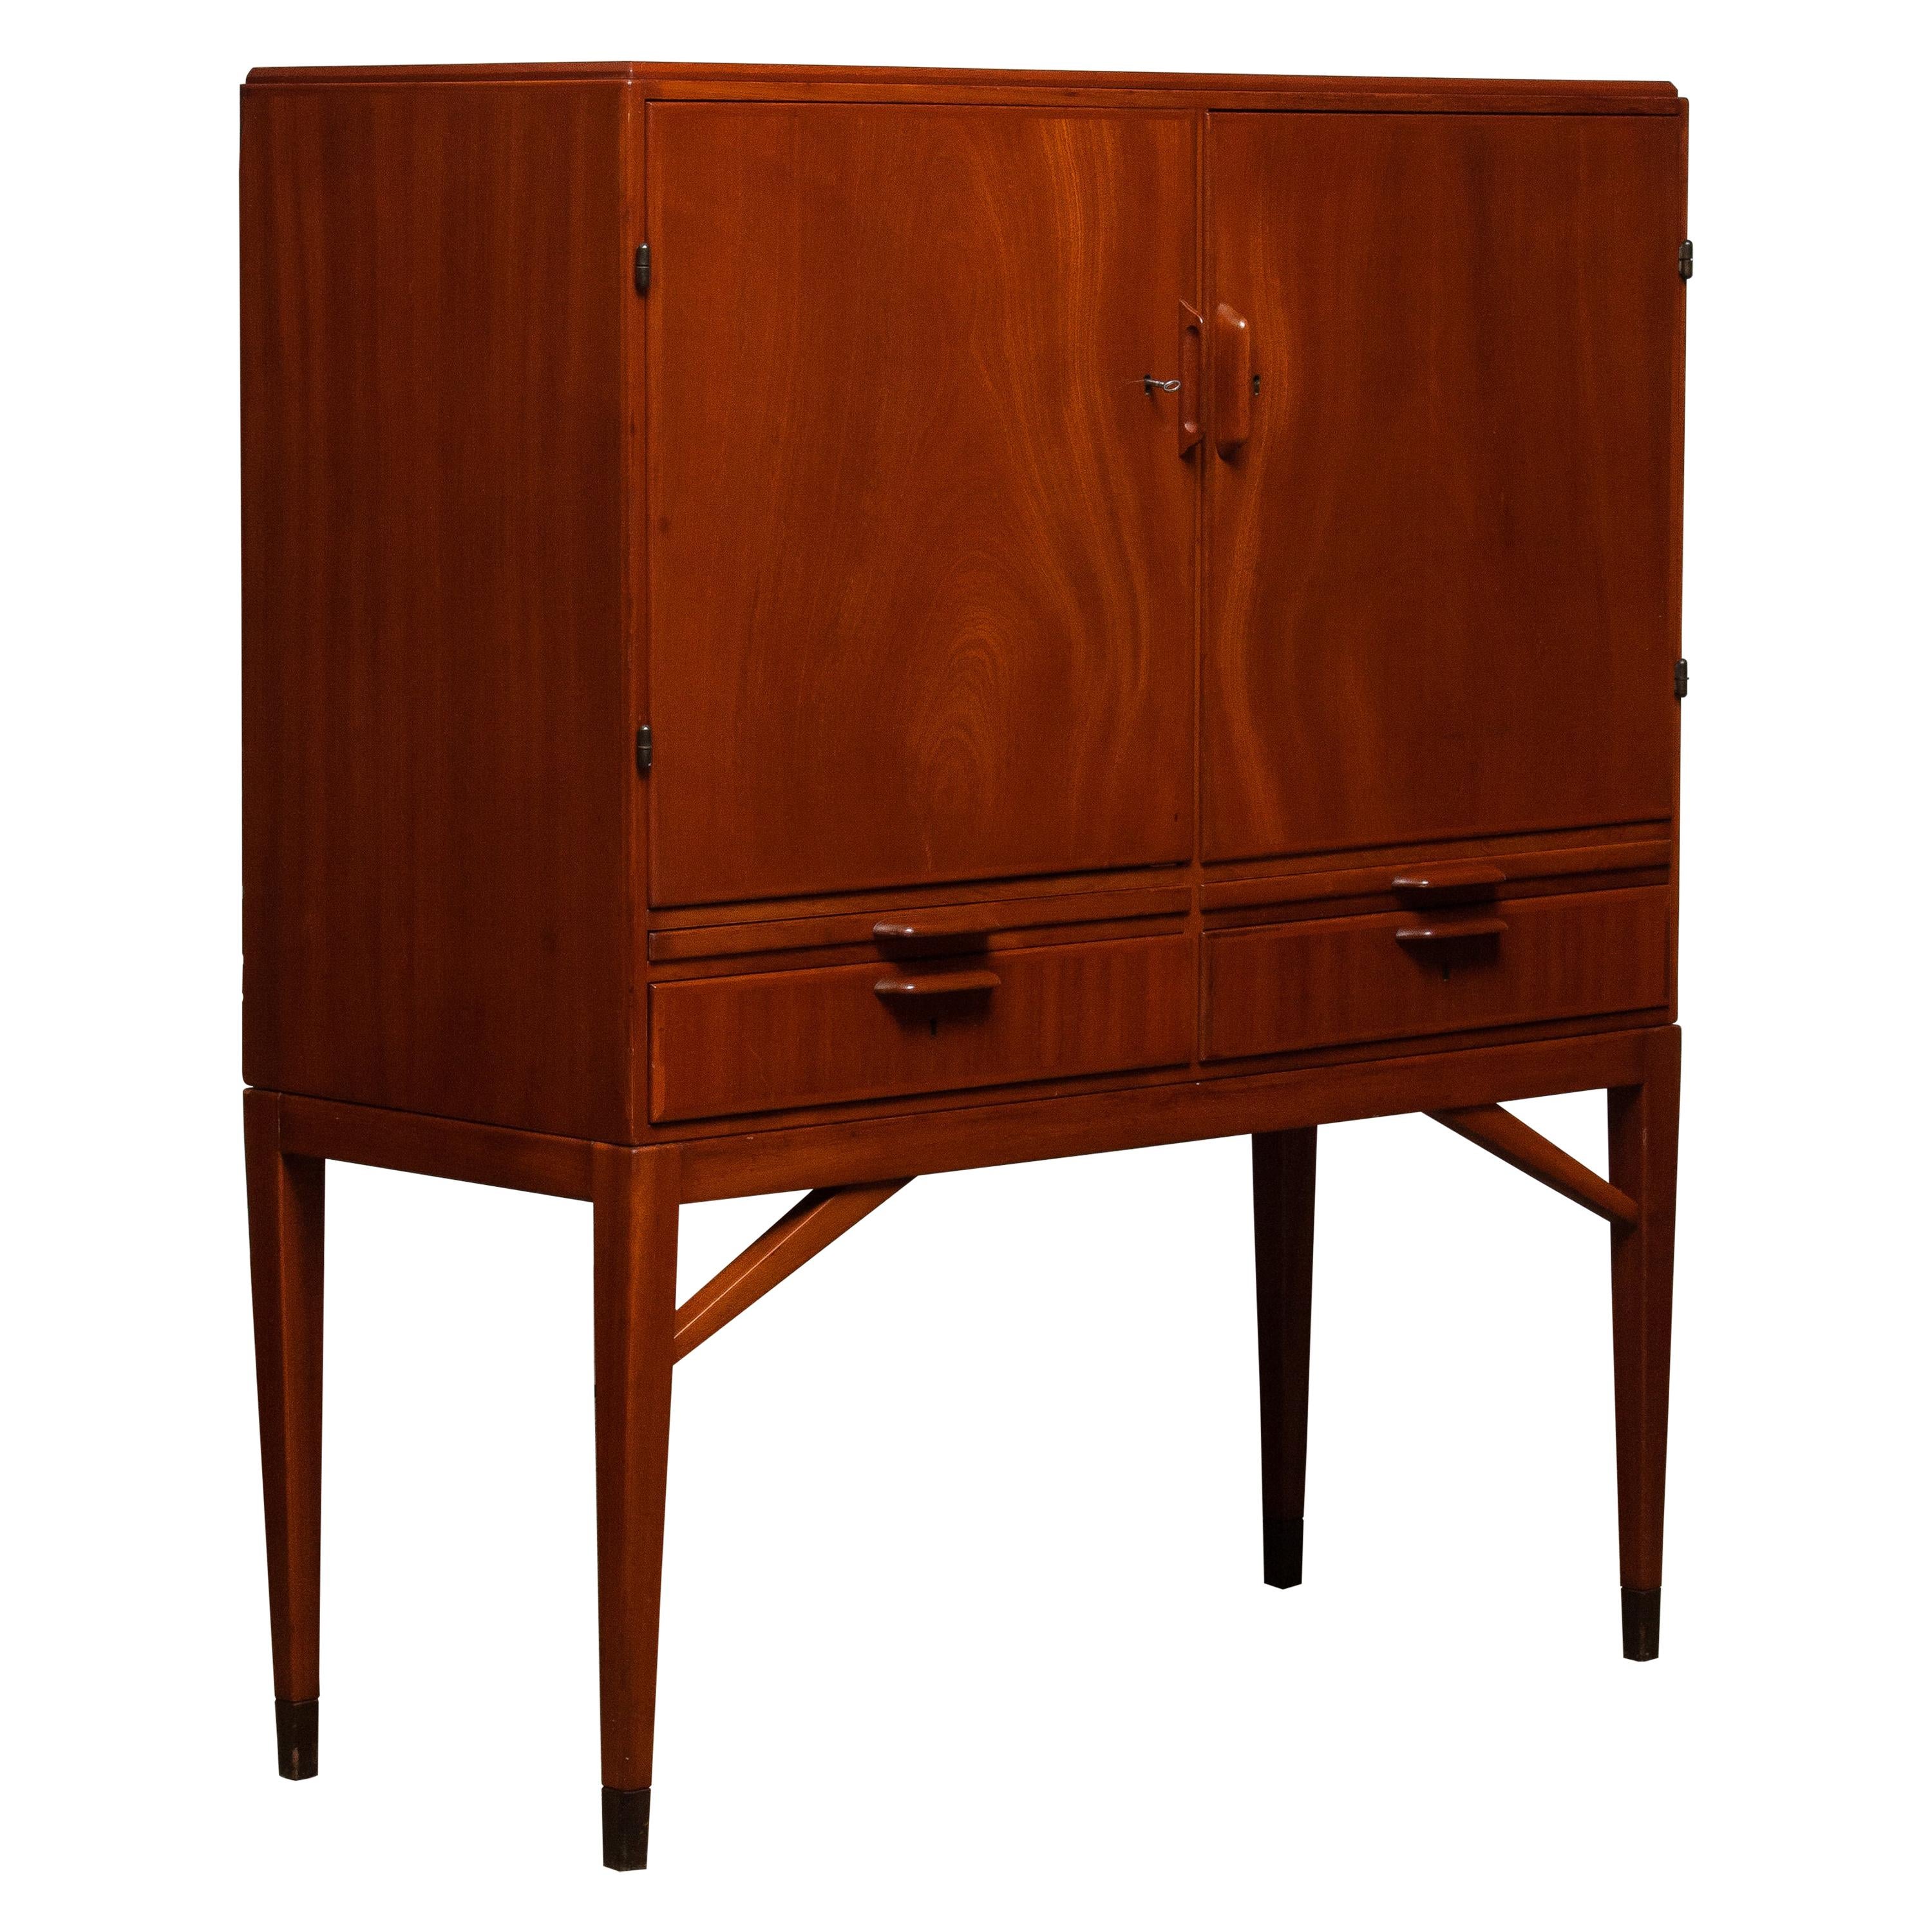 Swedish 1950s, High Quality Mahogany Dry Bar / Cabinet Made by Marbo Sweden, SMI Labeled